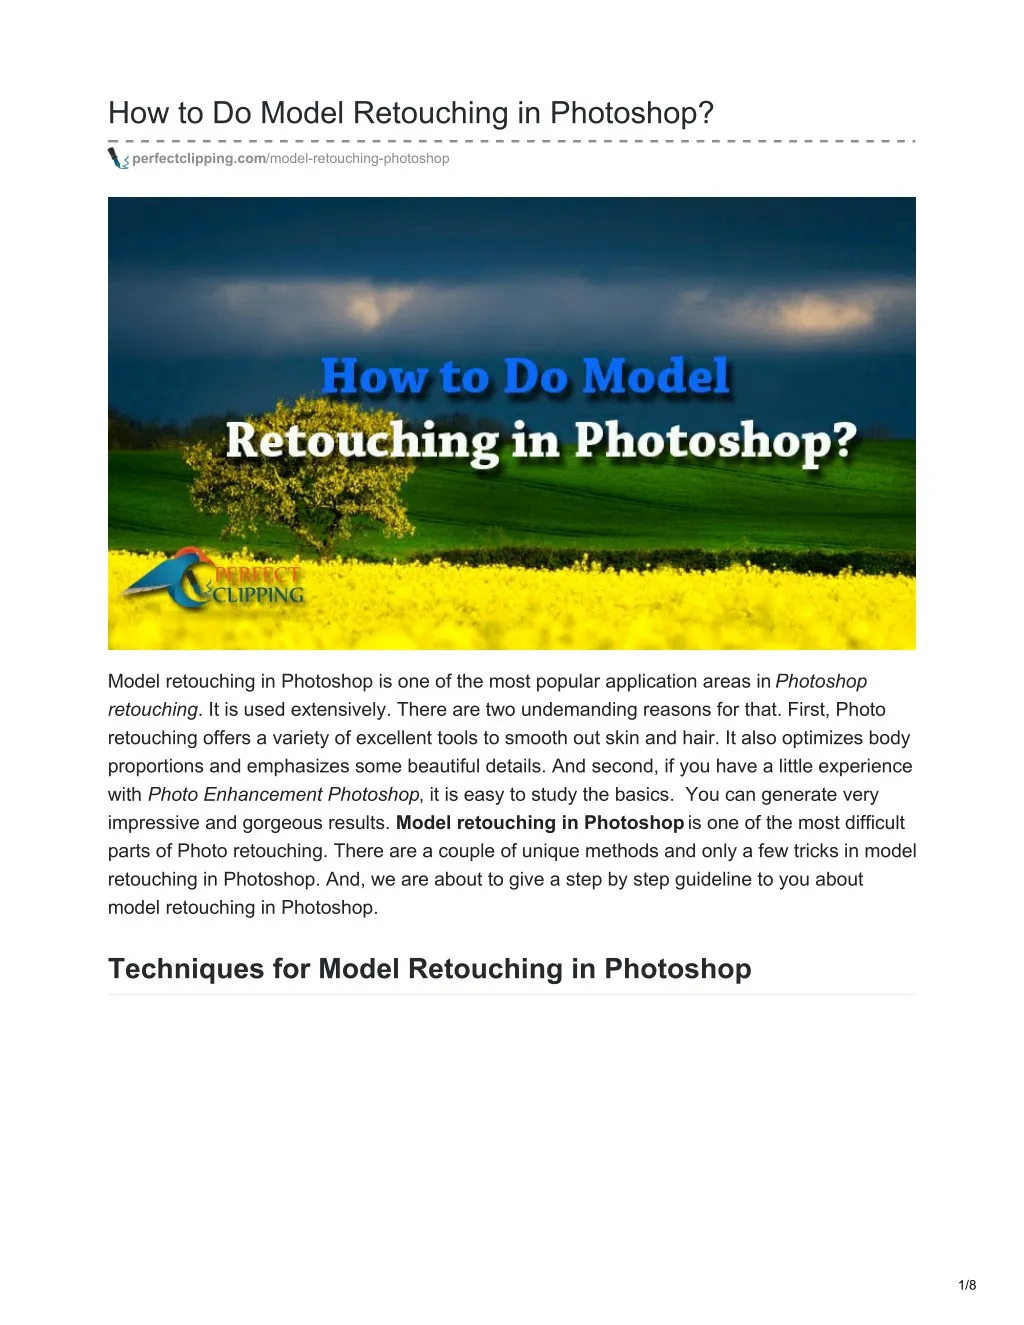 how to do model retouching in photoshop